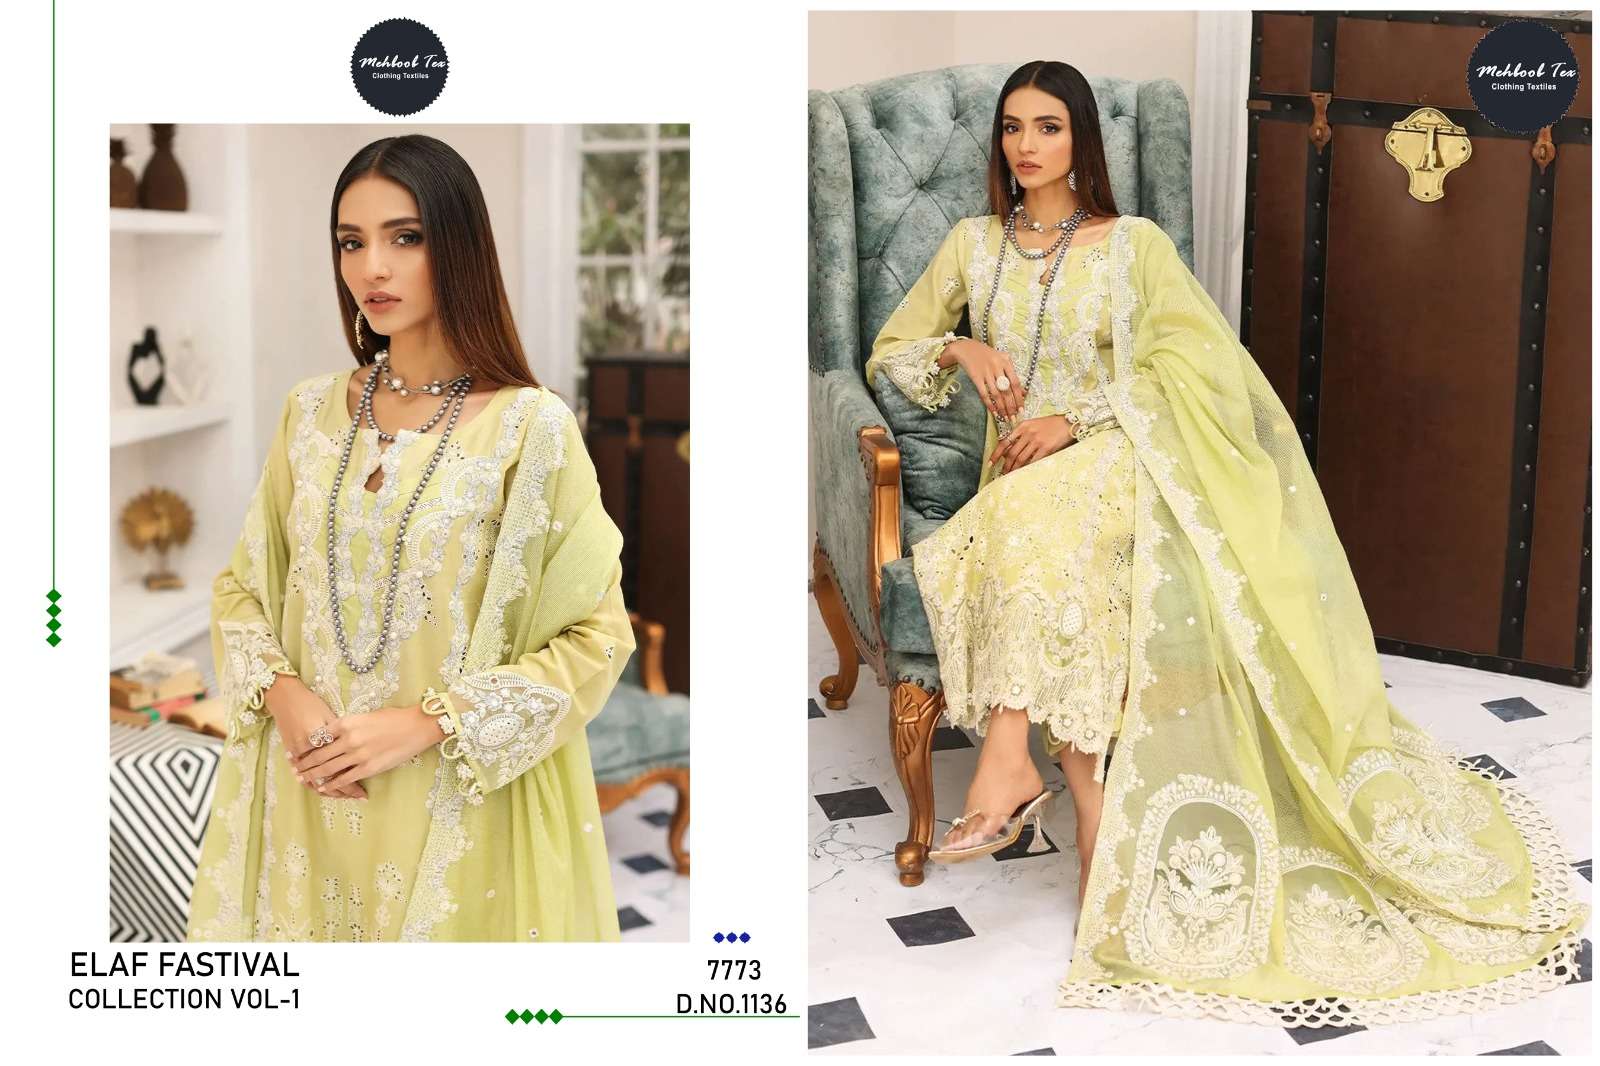 mehboob tex elaf fastival collection vol-1 exclusive designer pakistani salwar suits catalogue collection 2023 